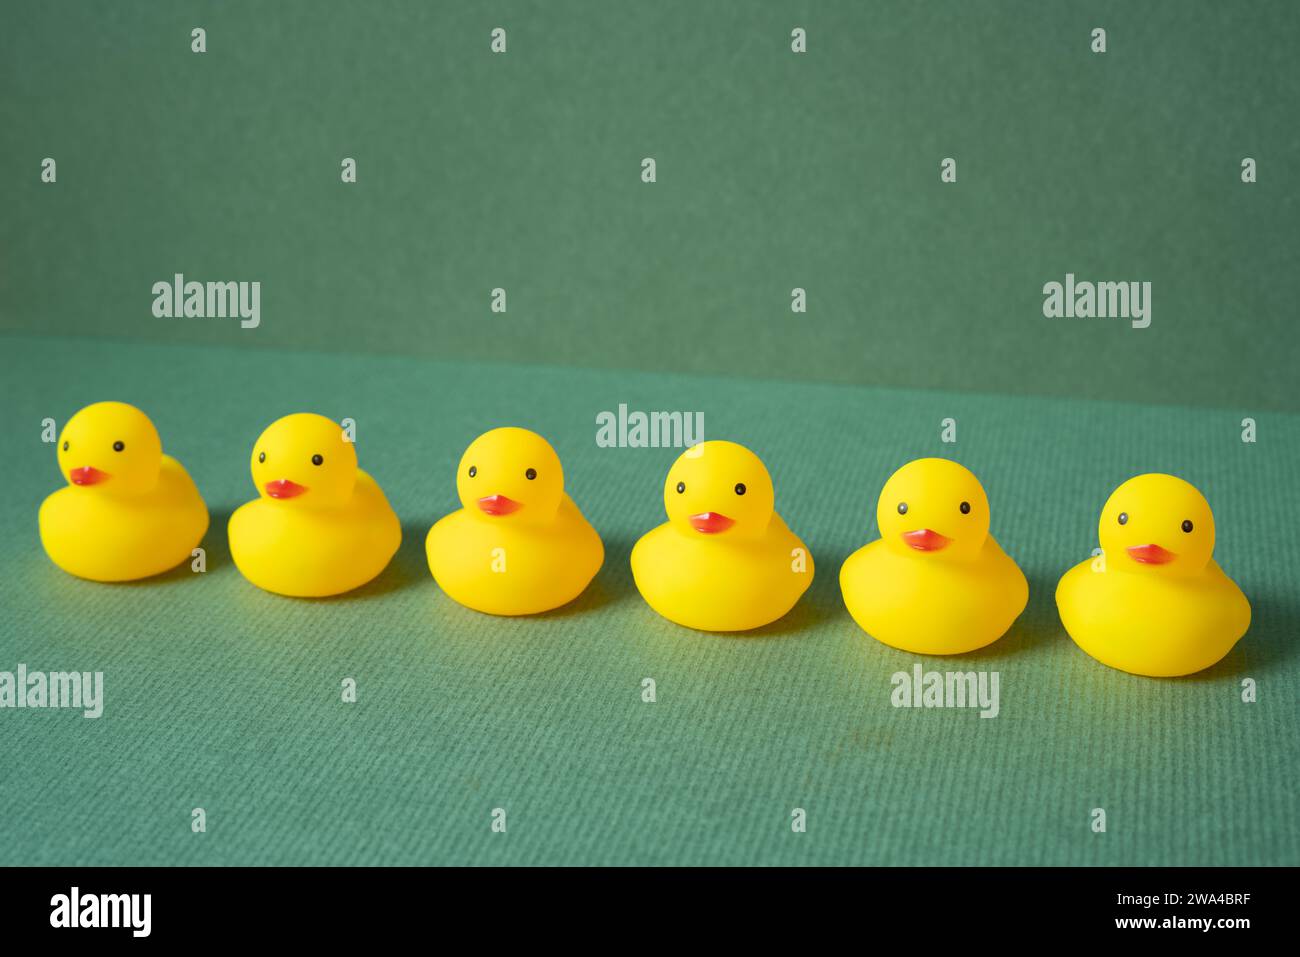 Row of yellow rubber duck doll on green background. teamwork leadership concept Stock Photo